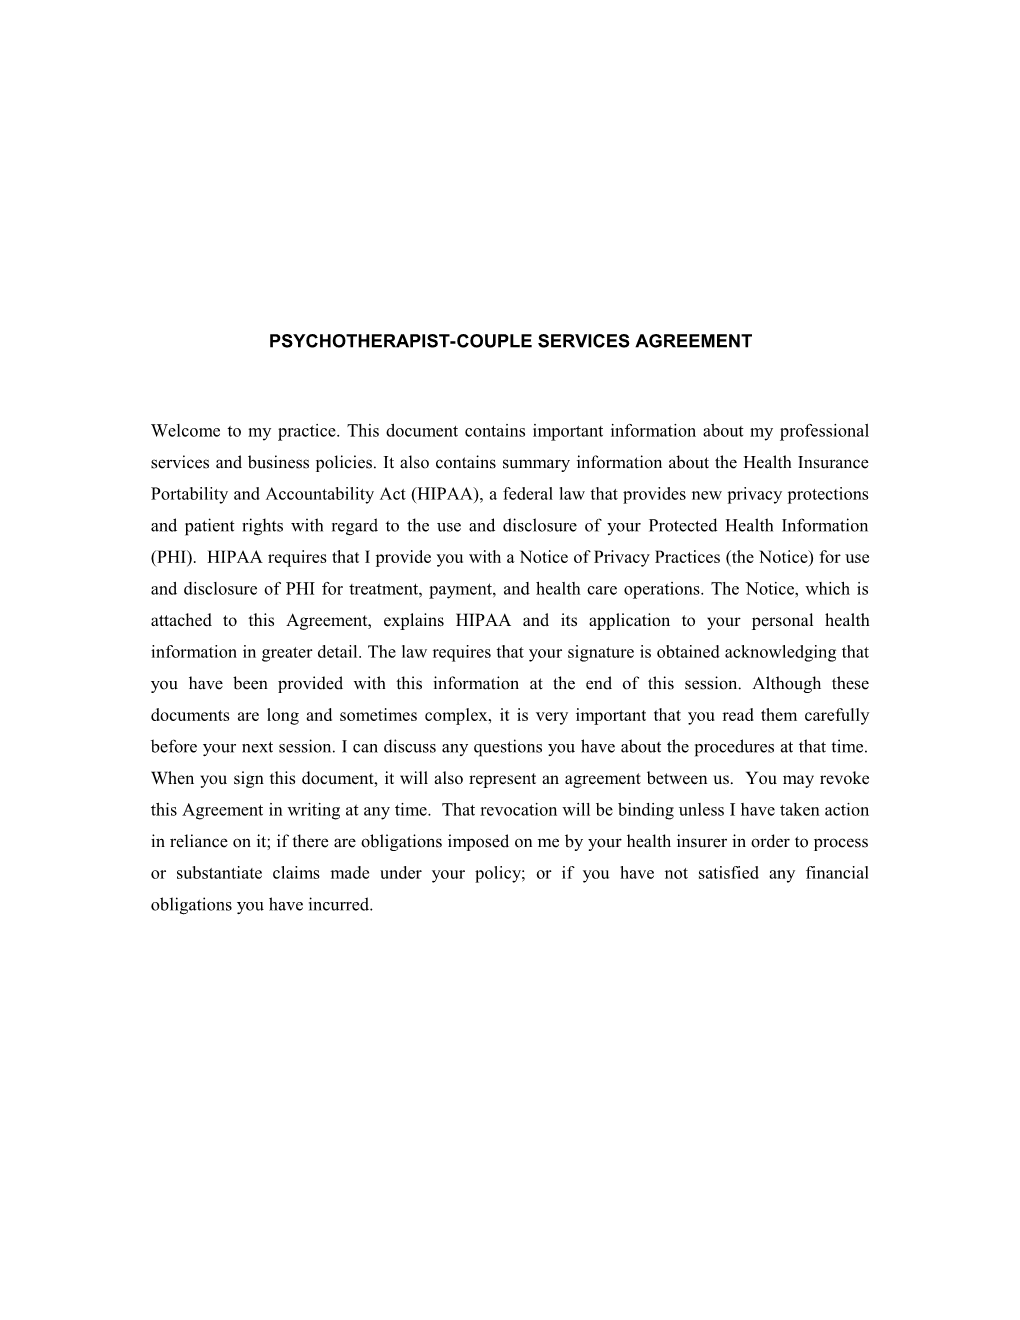 Psychotherapist-Couple Services Agreement